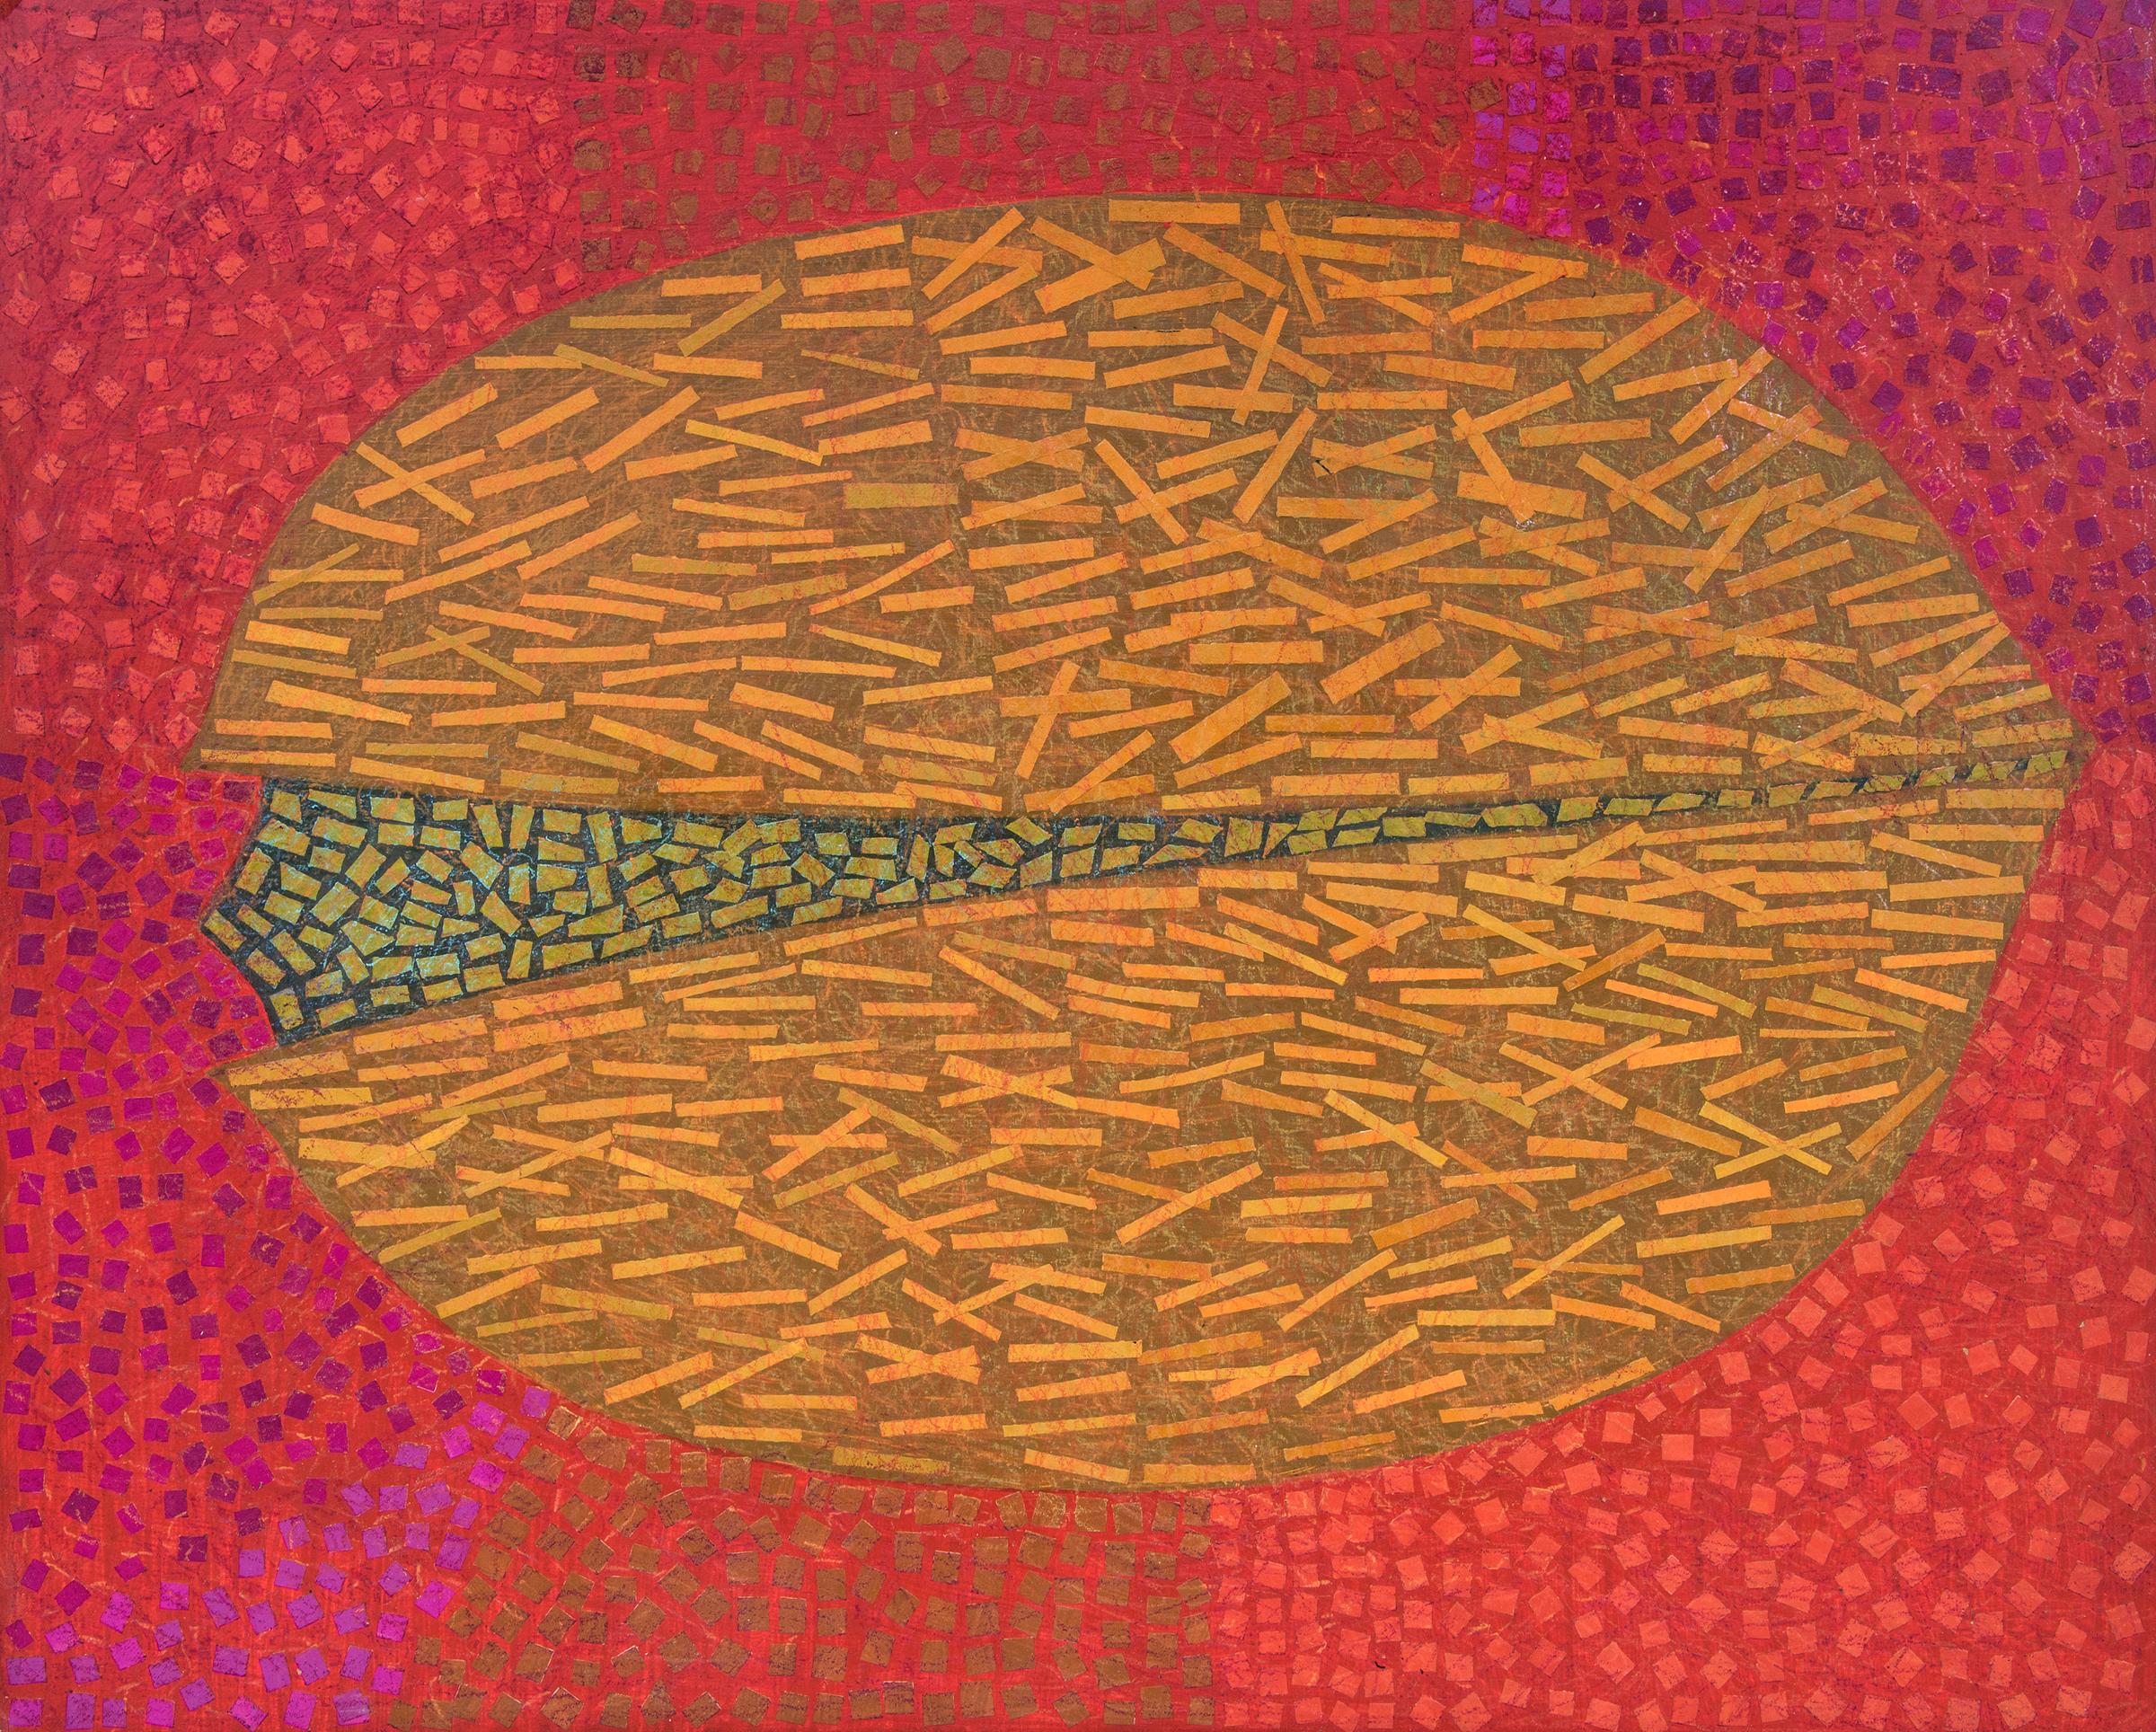 Pistachio Nut, 1970s Mixed Media Collage, Paper Collage on Board, Red Orange - Art by Margo Hoff